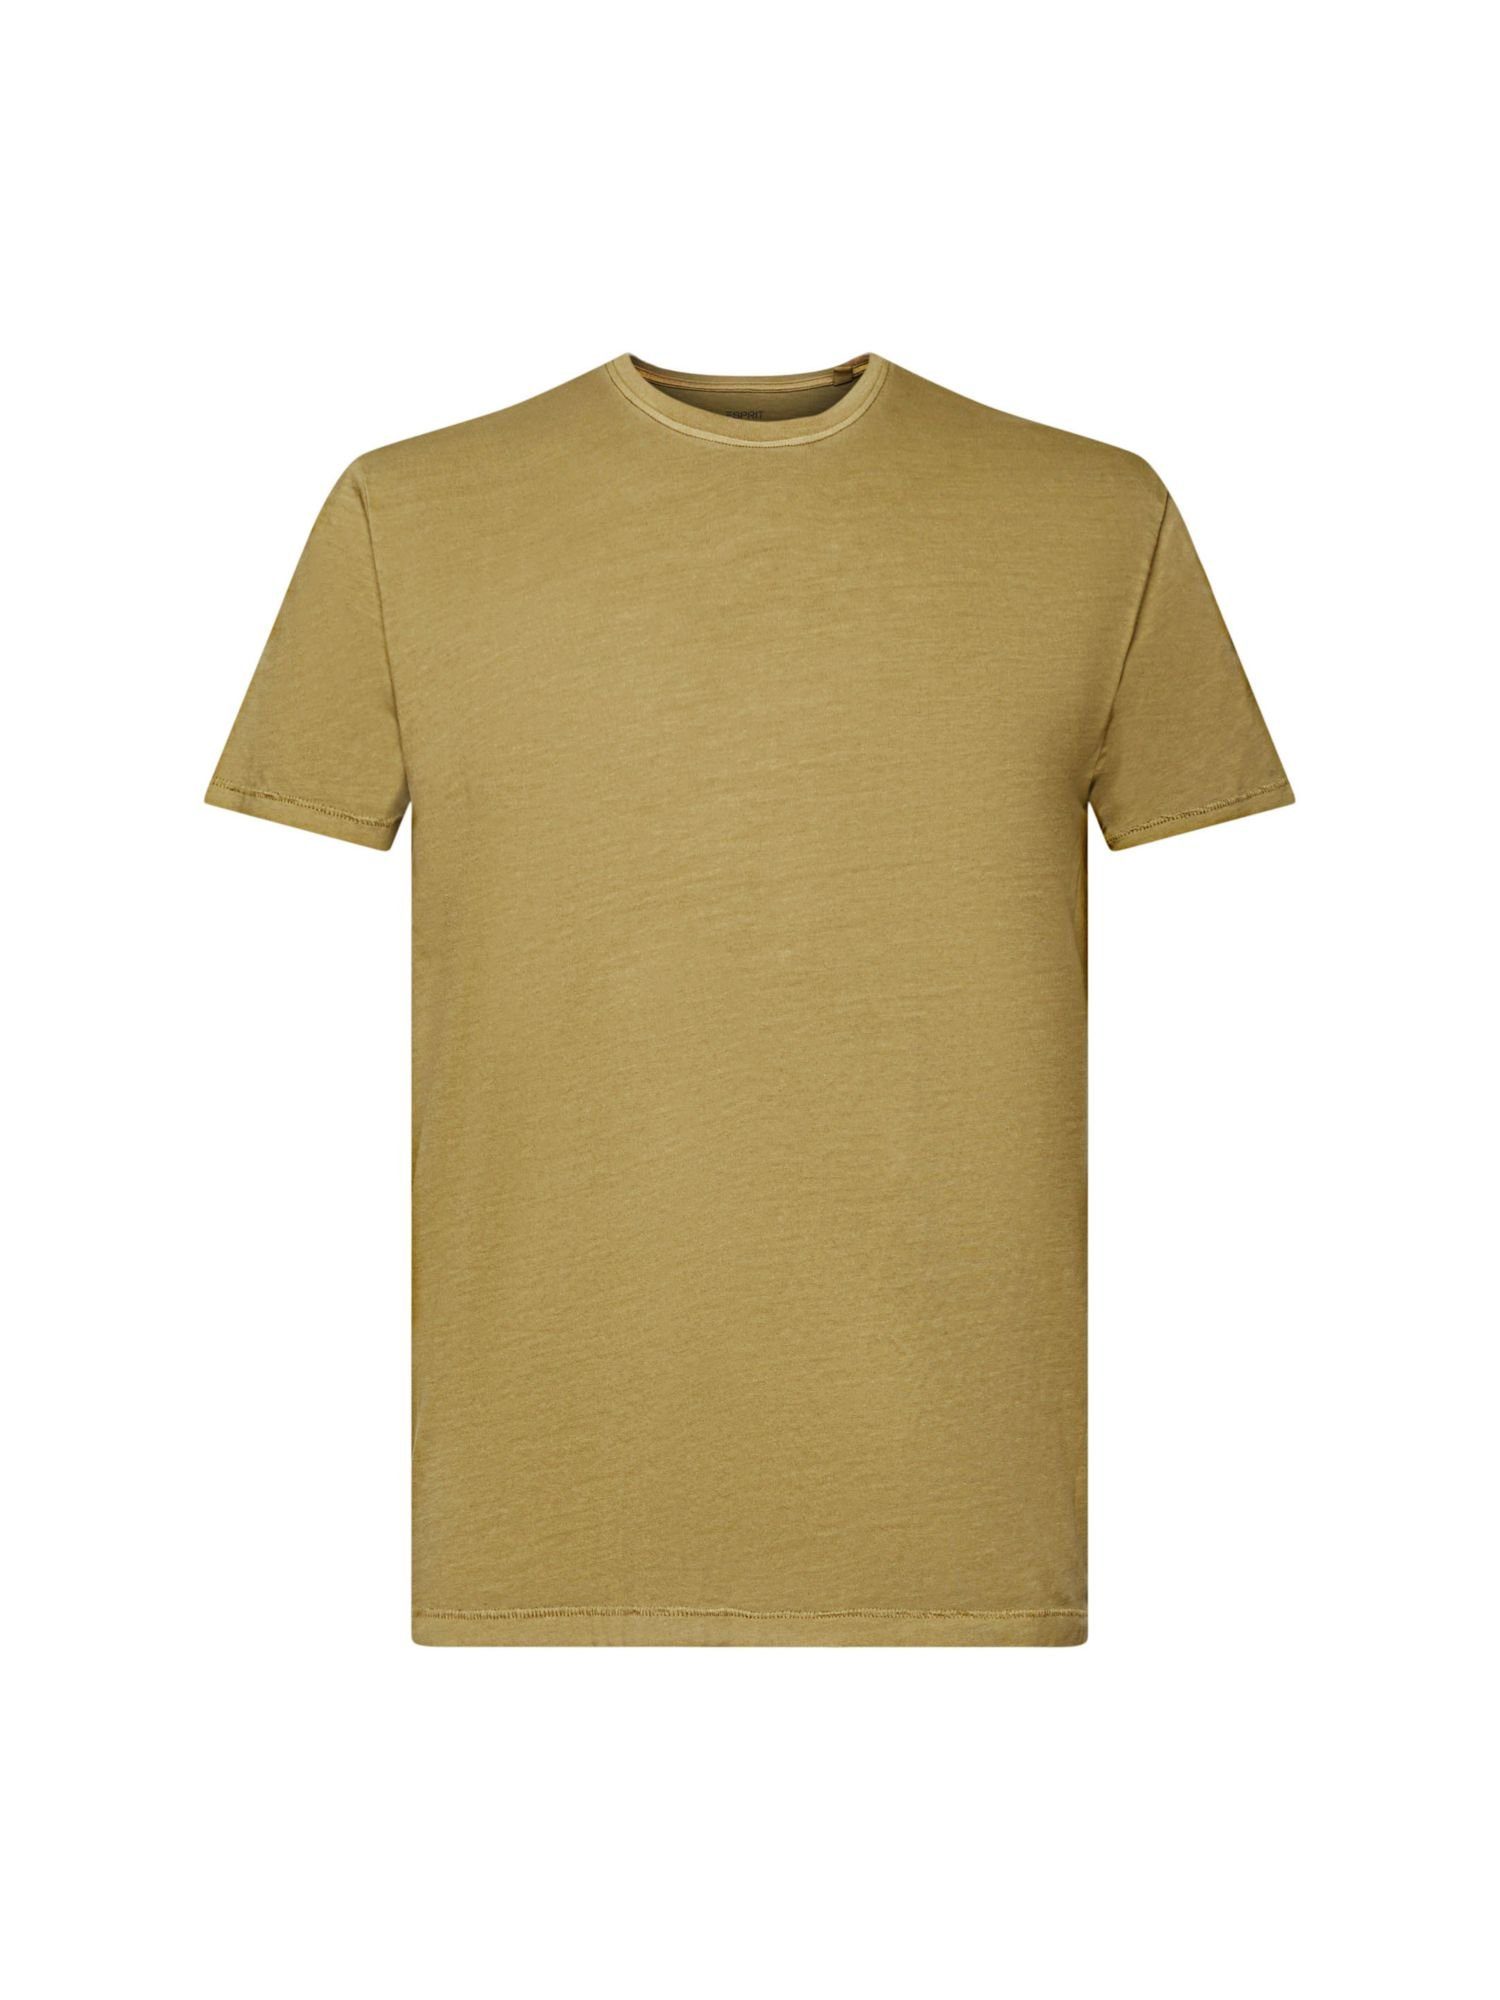 edc by Esprit T-Shirt T-Shirt im Washed-Look, 100 % Baumwolle (1-tlg) OLIVE